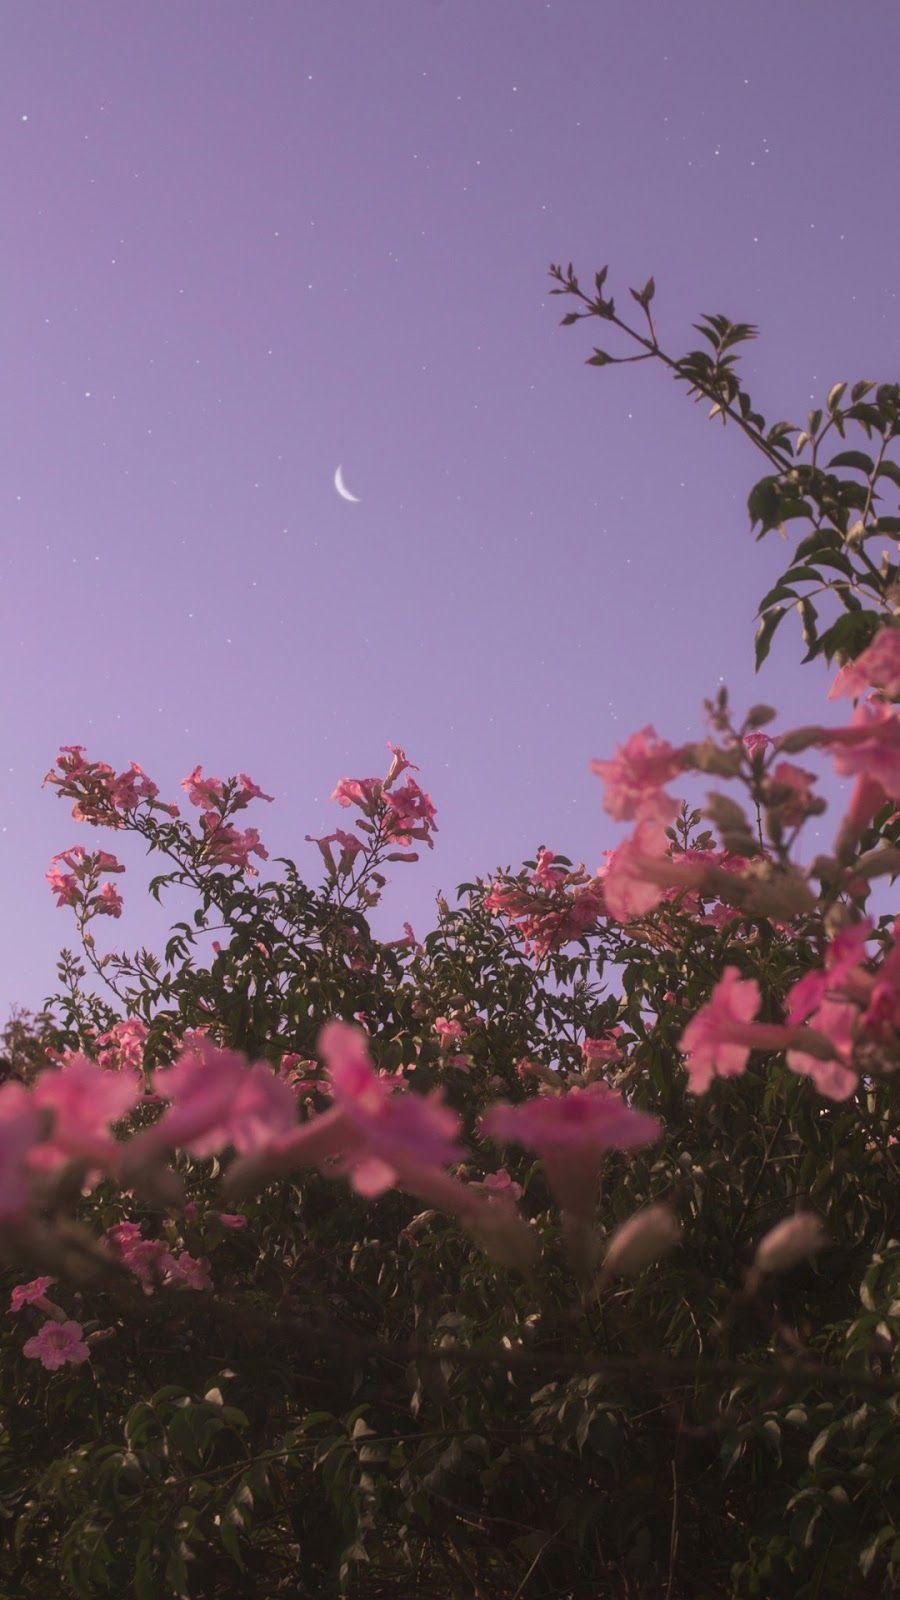 Flower under night sky #wallpaper #iphone #android #background #followme #cutewallpape. Android wallpaper flowers, Night sky wallpaper, Aesthetic iphone wallpaper